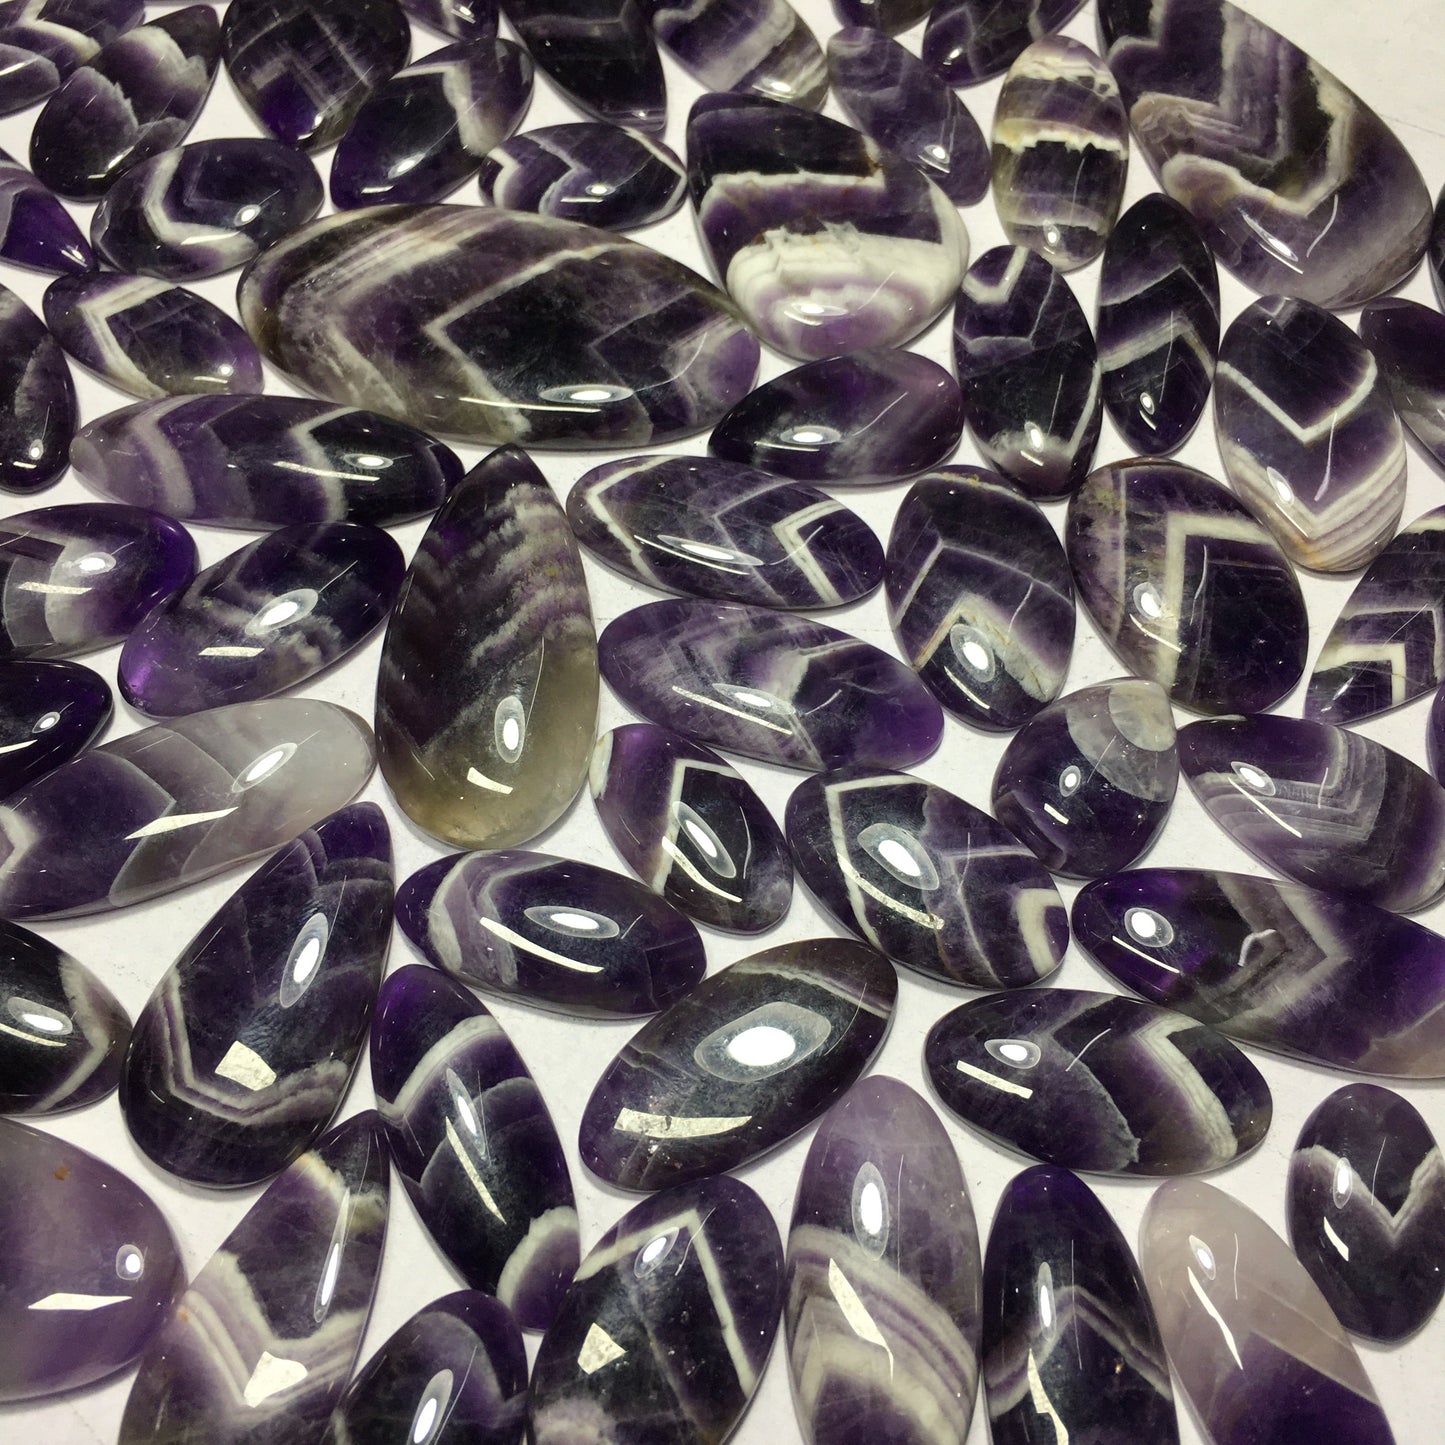 Natural Amethyst lace Agate Cabochon